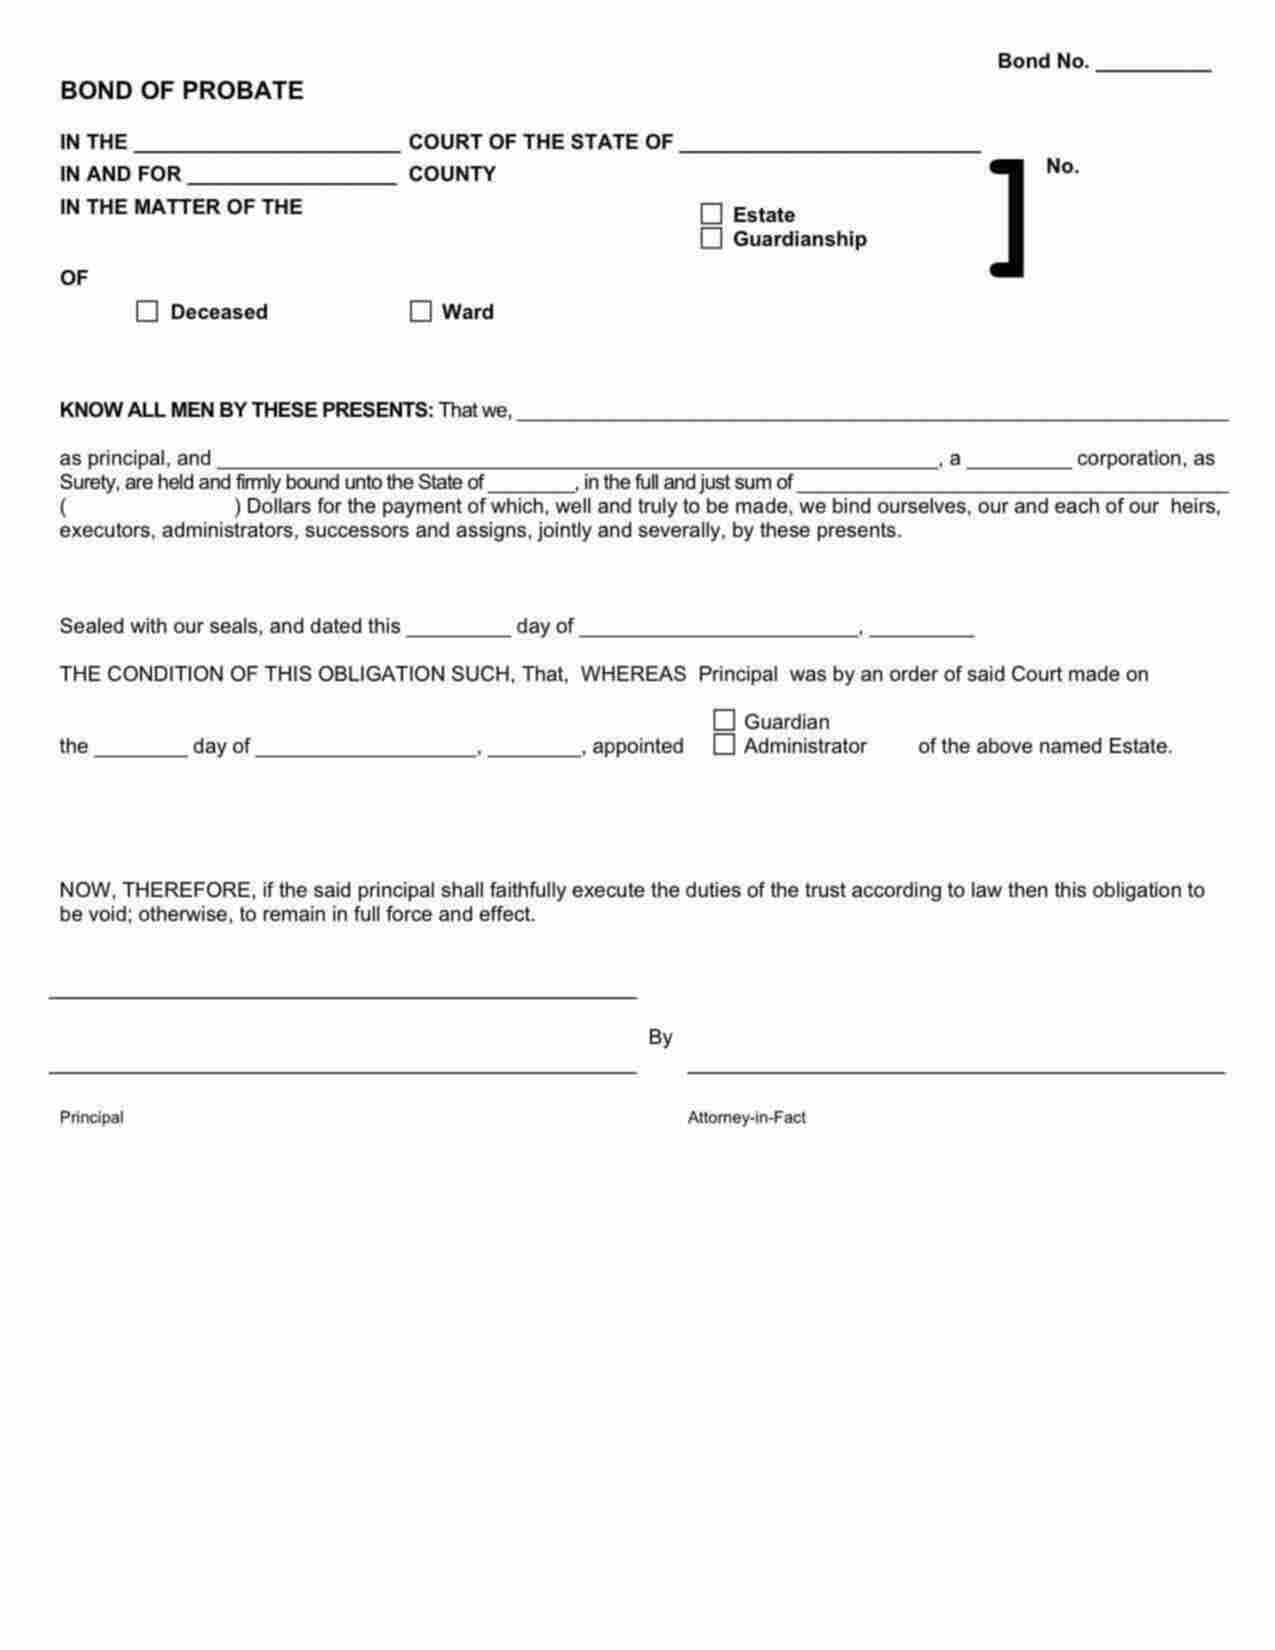 New Mexico Conservator/Guardian Bond Form